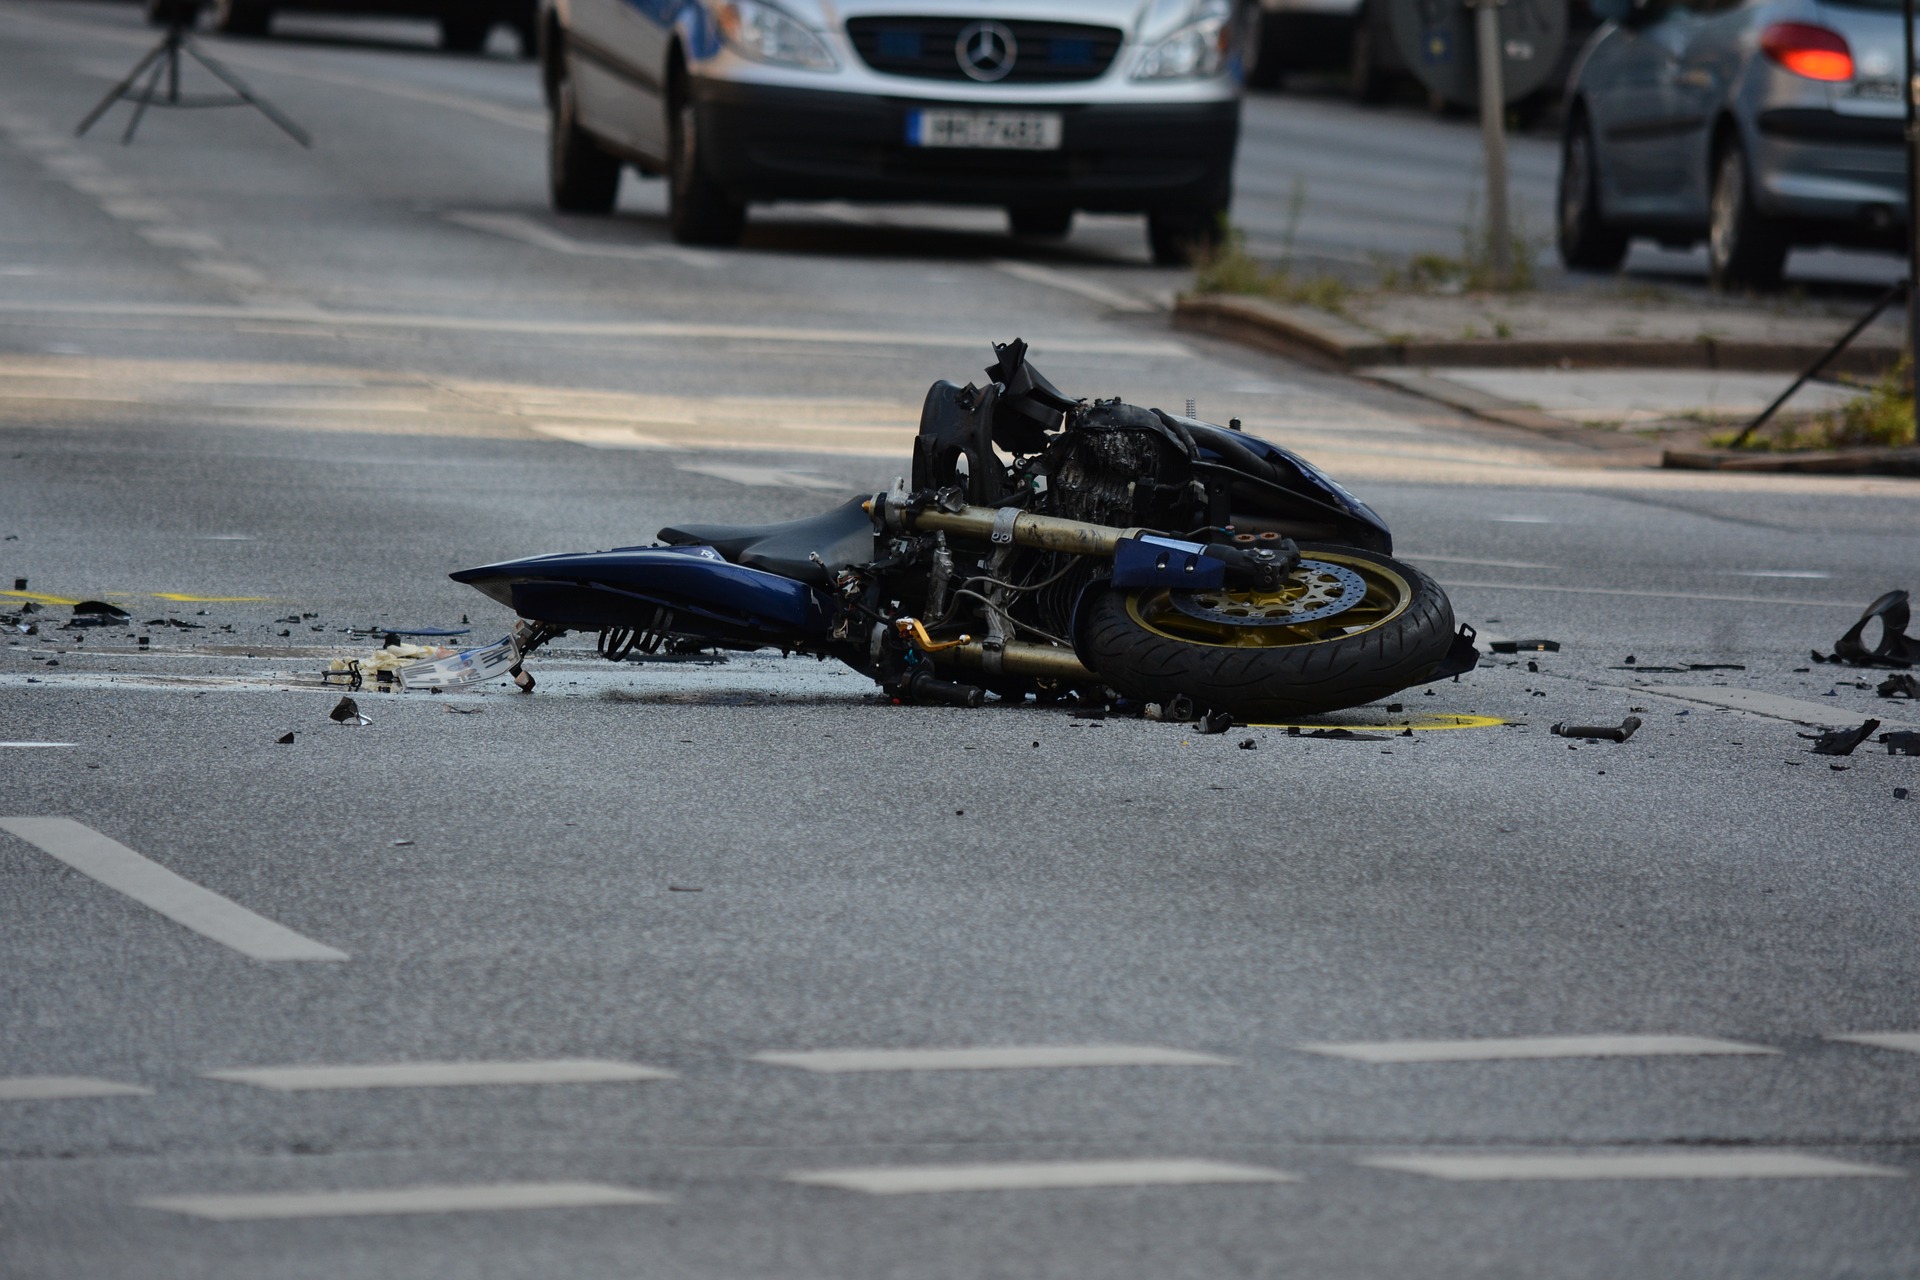 Denver Motorcycle Accident Attorney